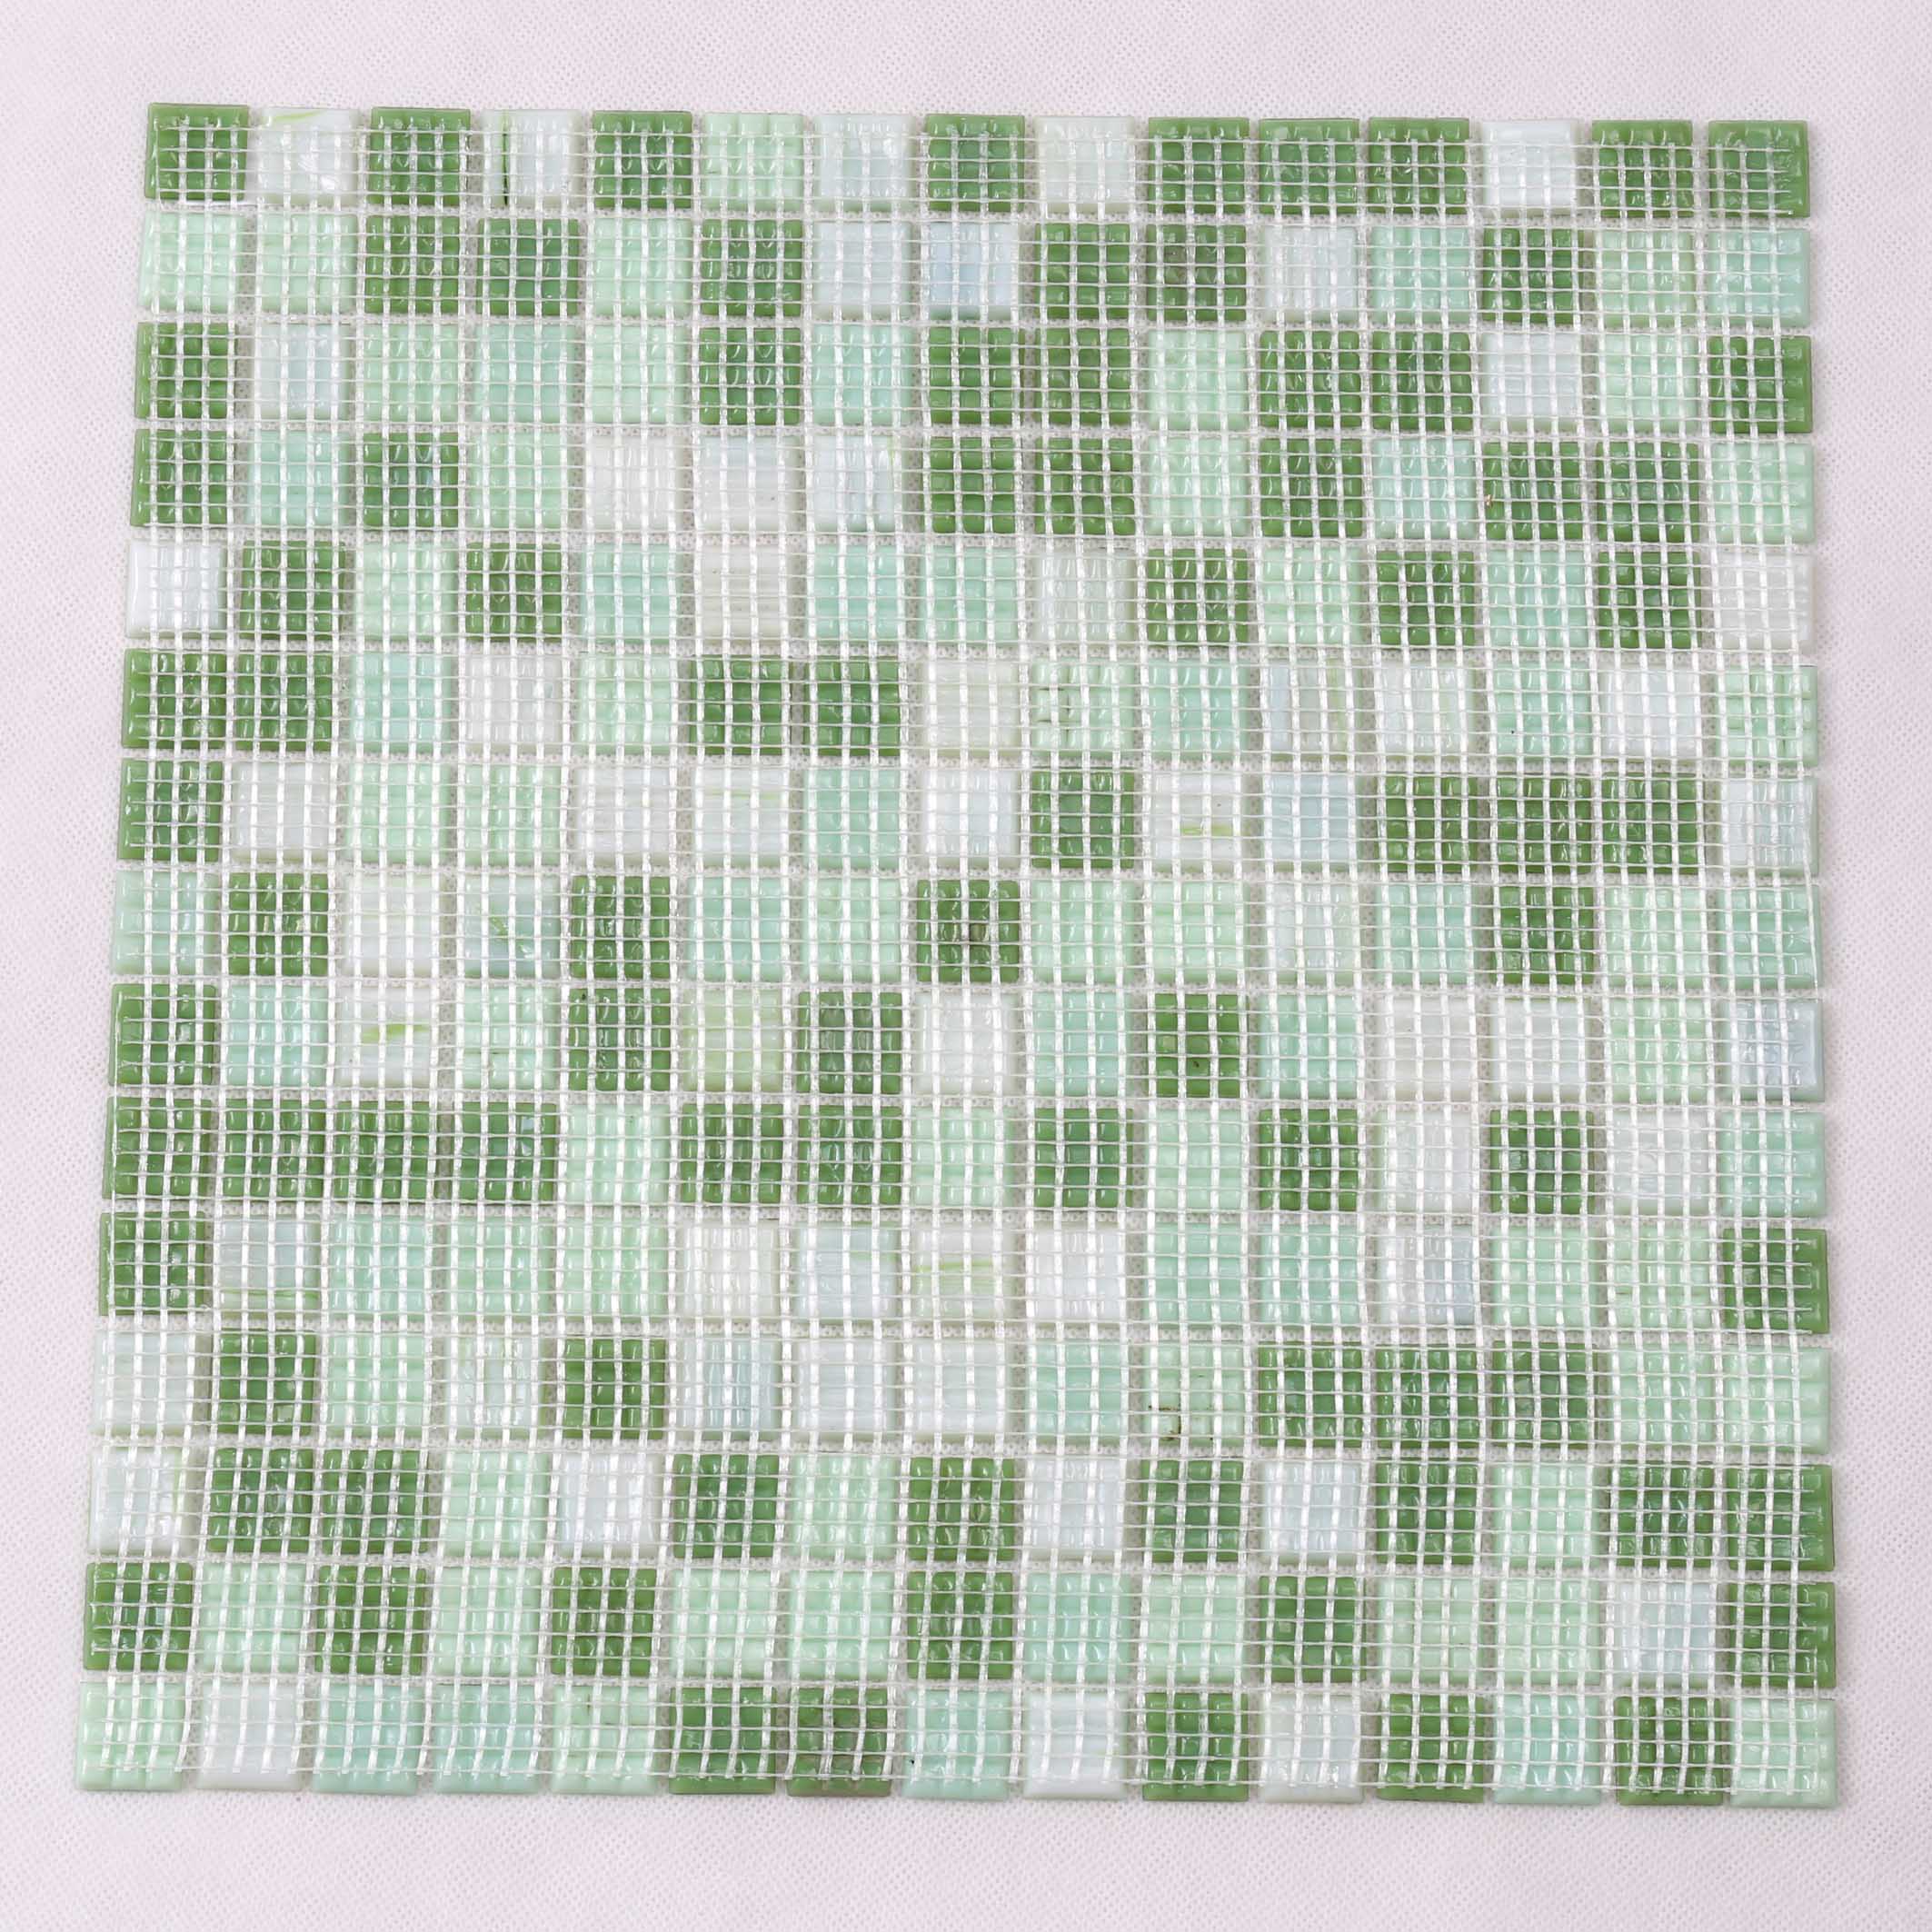 Heng Xing Custom recycled glass mosaic tiles wholesale for fountain-5